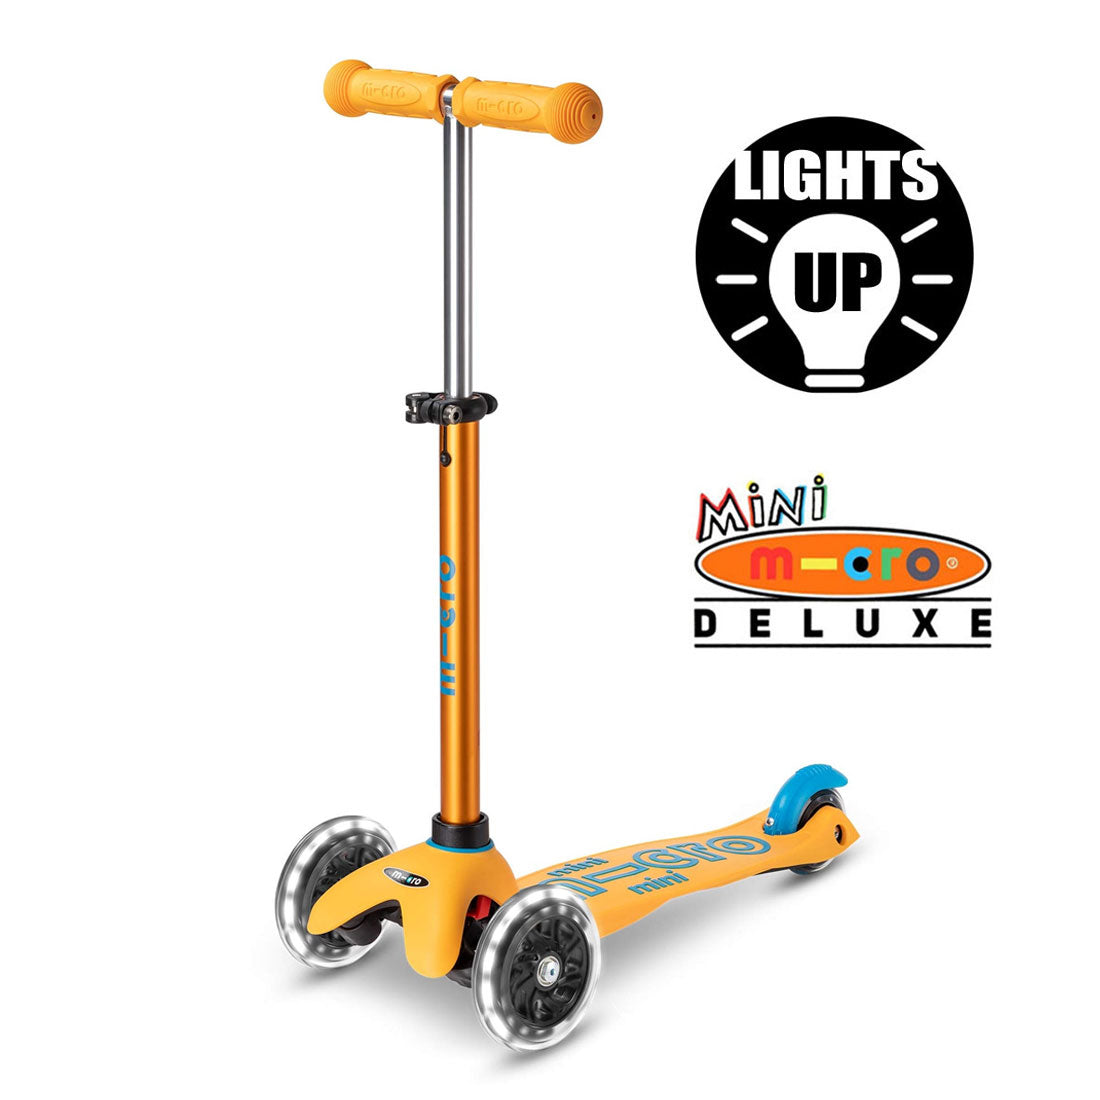 Micro Mini Deluxe LED Scooter - Apricot Scooter Completes Rec